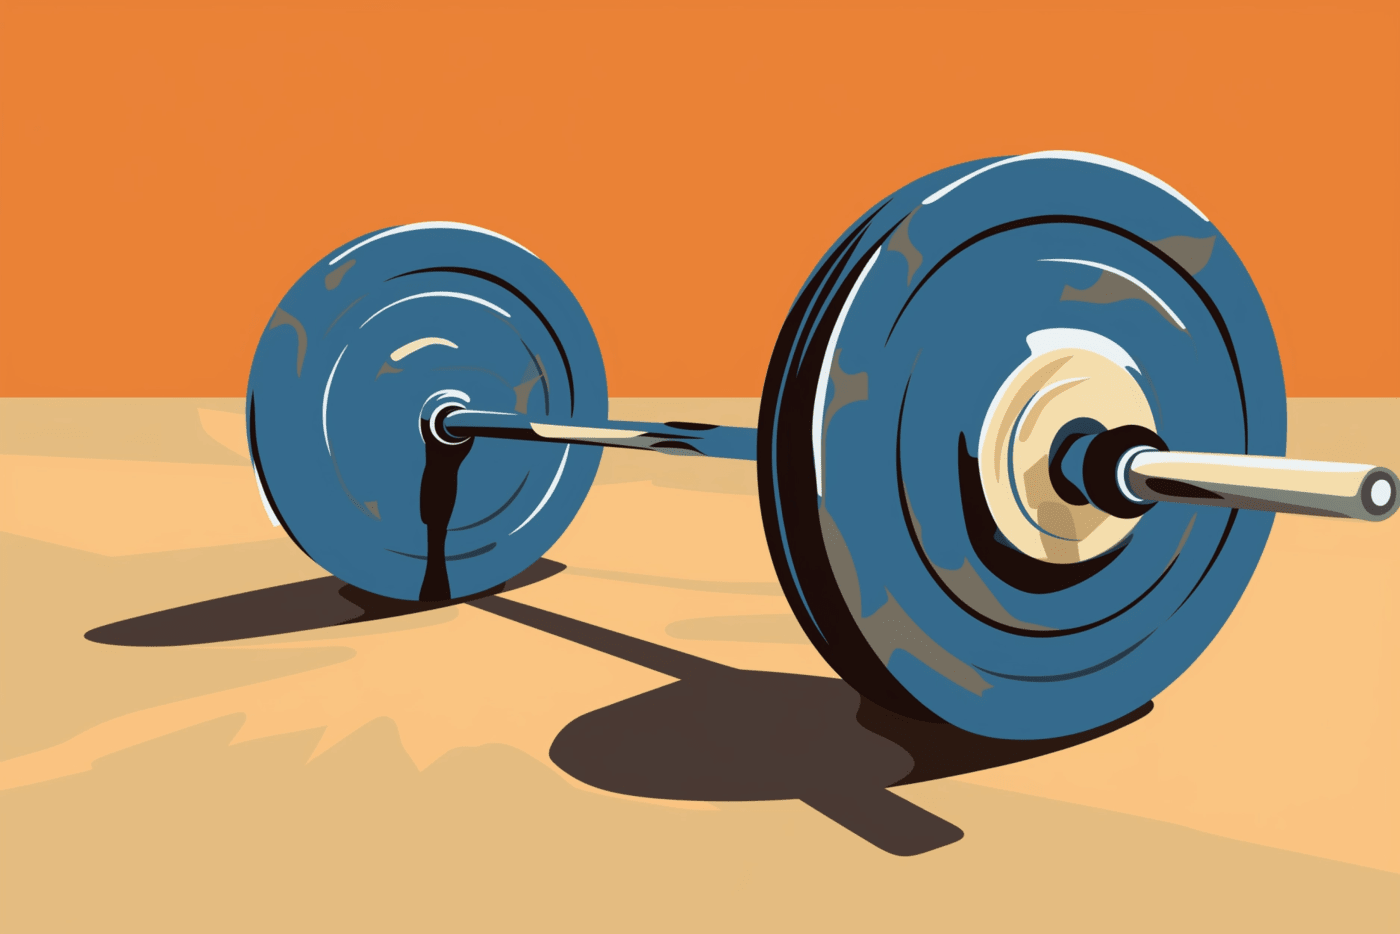 A loose barbell